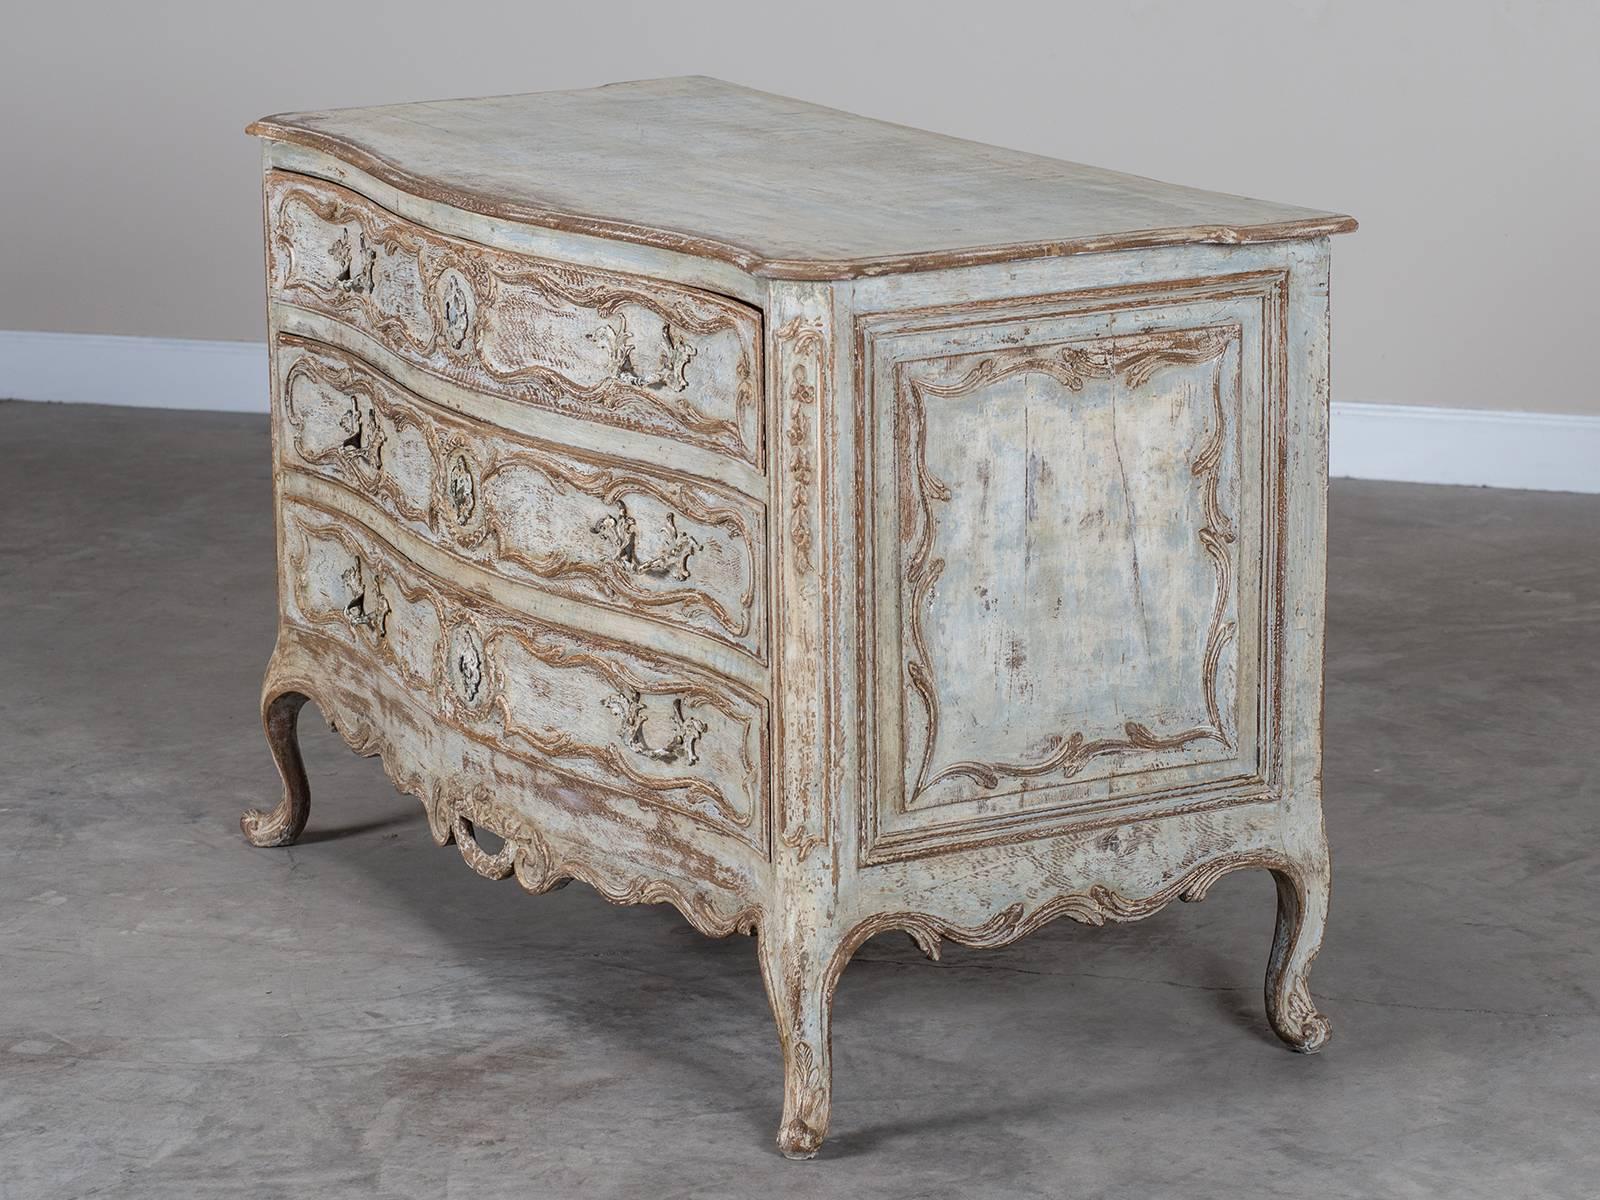 The exceptional carved detail of this Louis XV period chest of drawers, circa 1750 is wonderful to view. Enhanced by the painted finish this chest was designed to be seen from both sides and the front as the exquisite and delicate balance of the